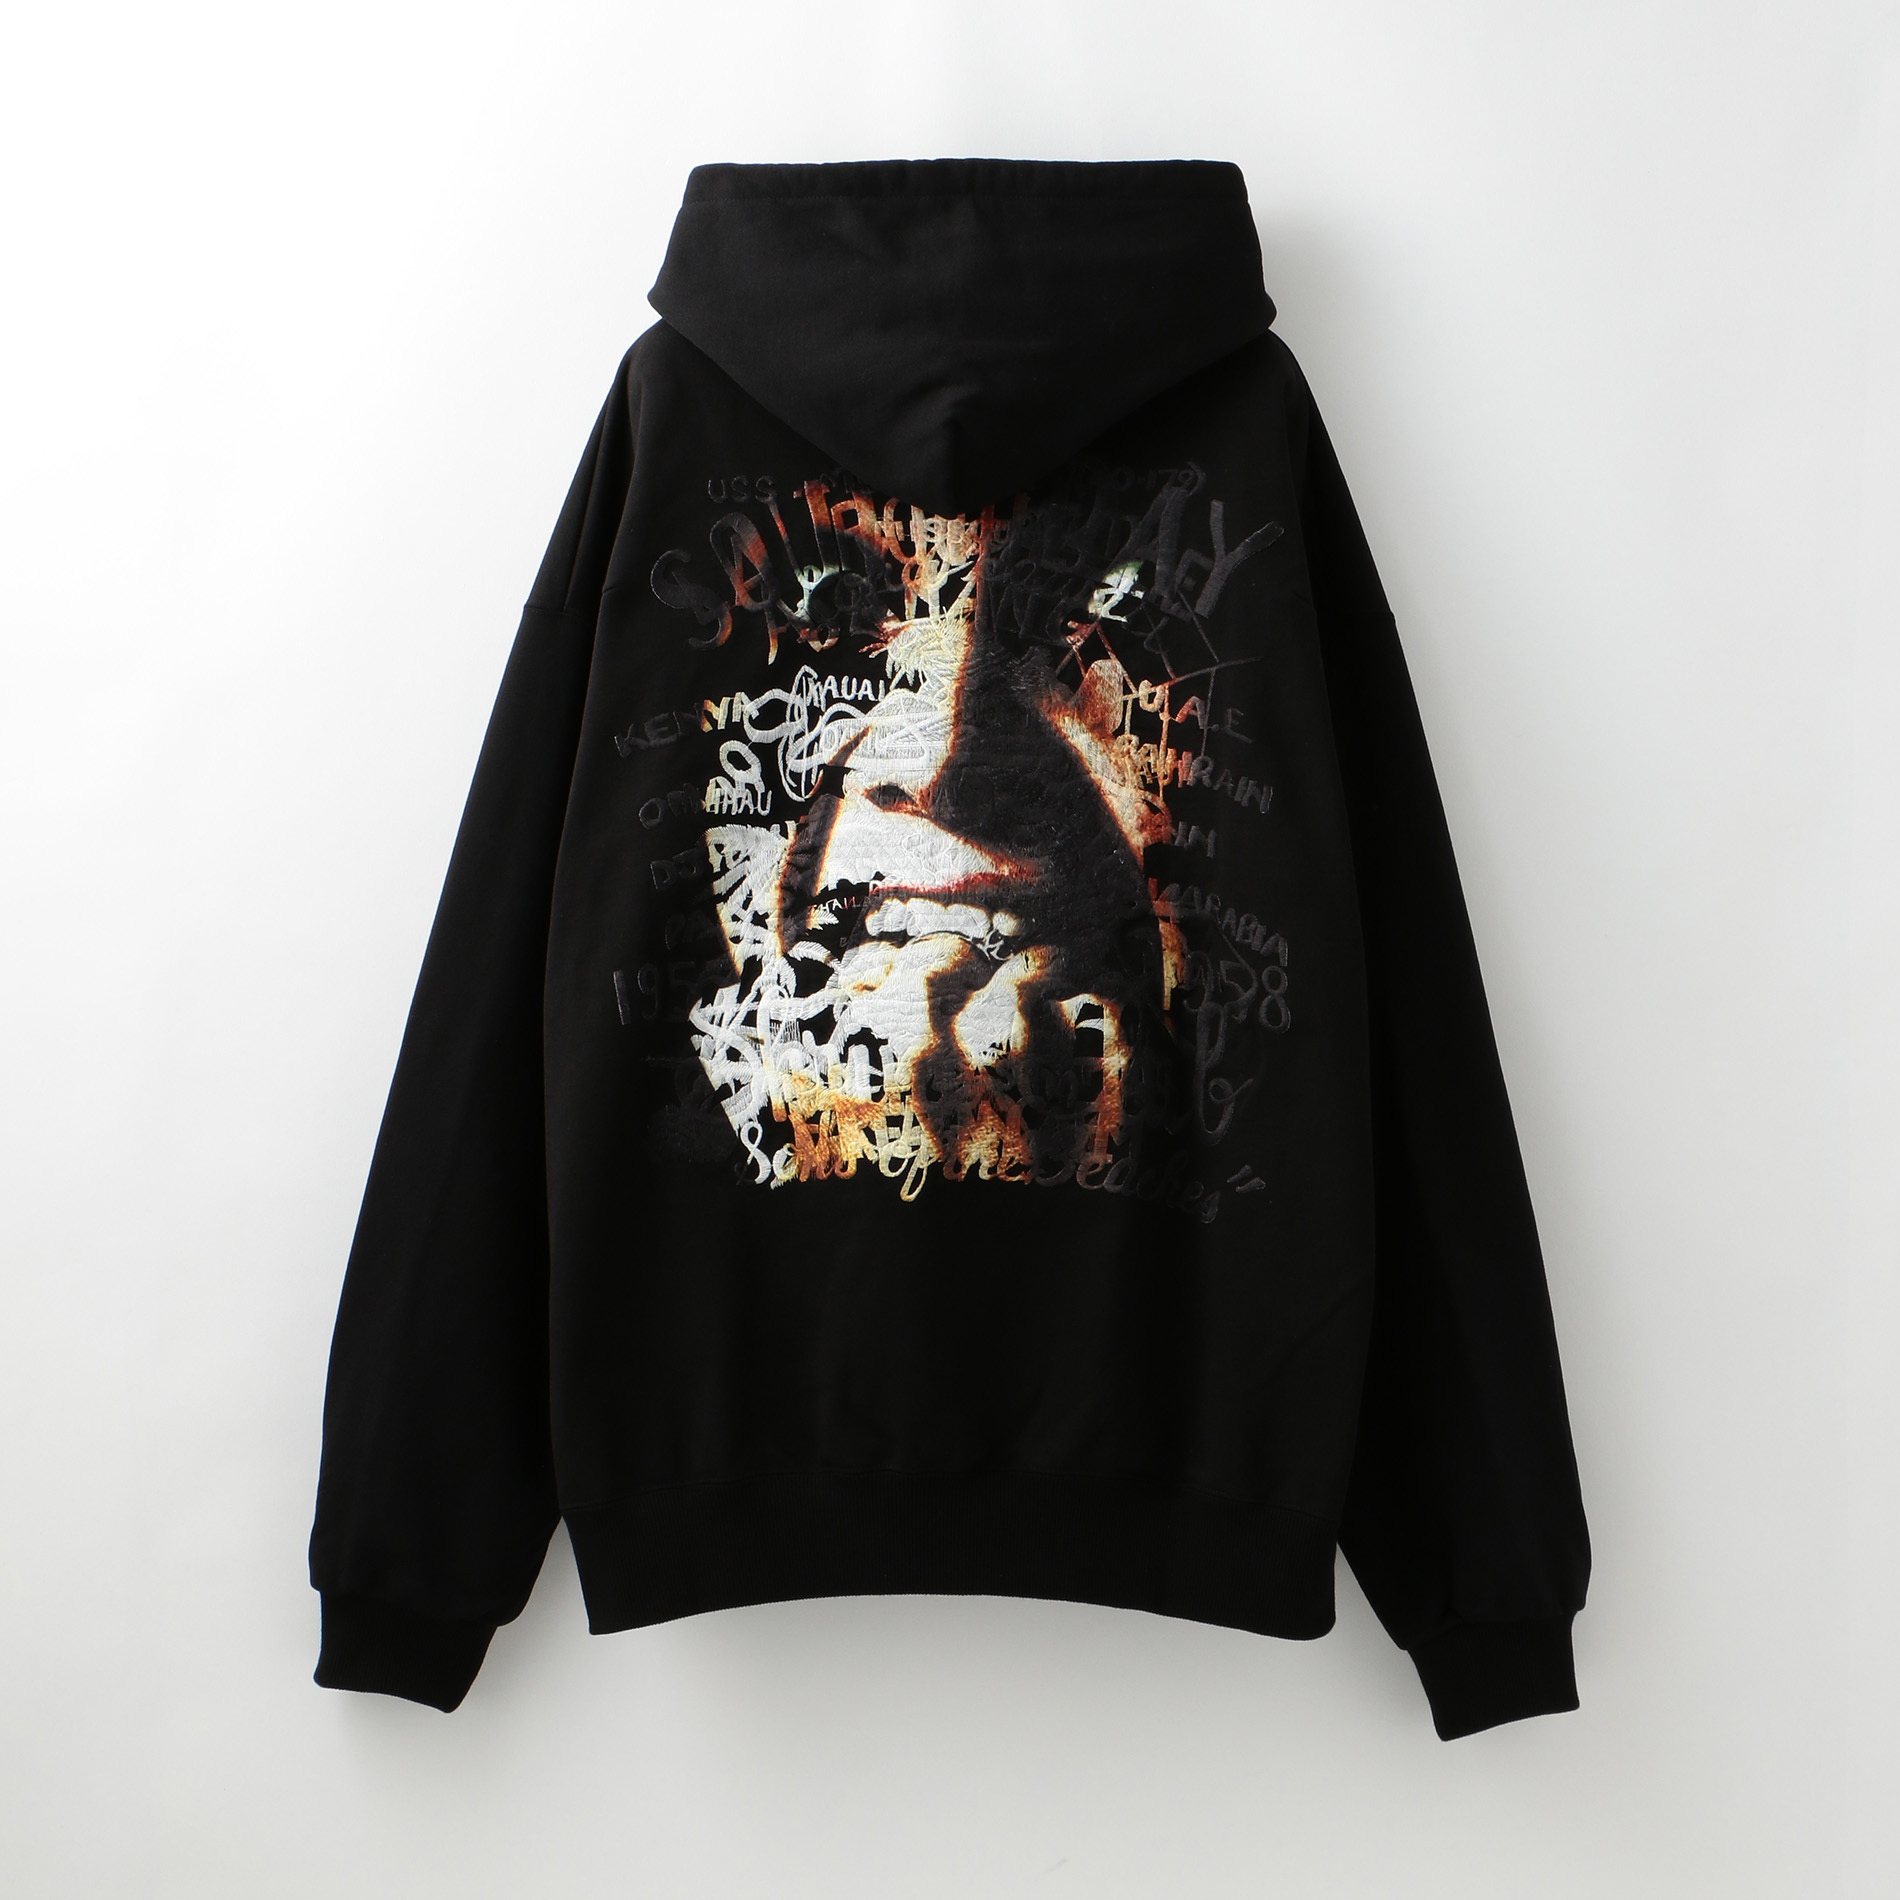 COTTONPOLYESTE定価5.2万 doublet HORROR EMBROIDERY パーカー XL